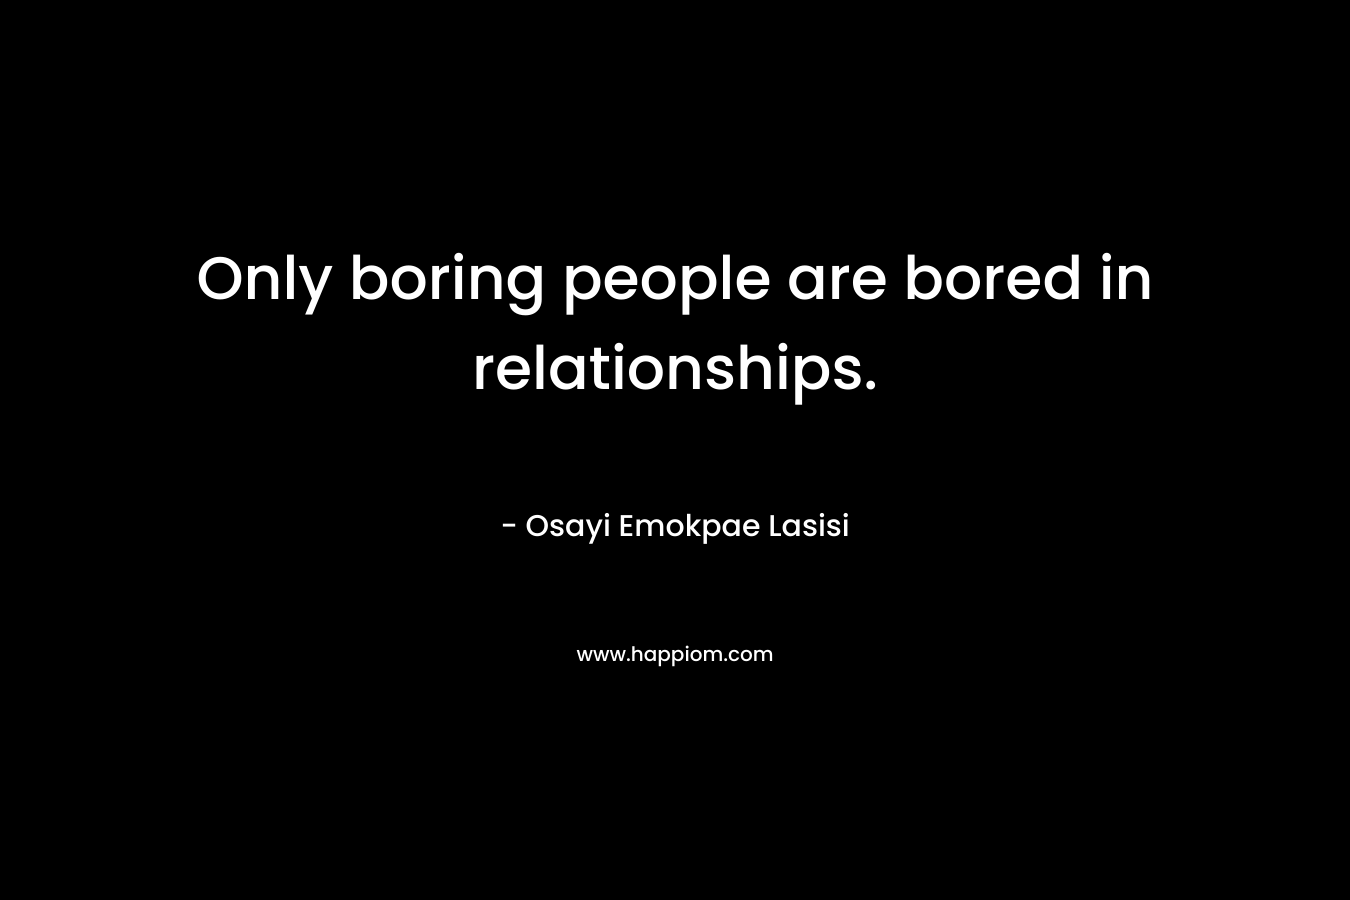 Only boring people are bored in relationships. – Osayi Emokpae Lasisi